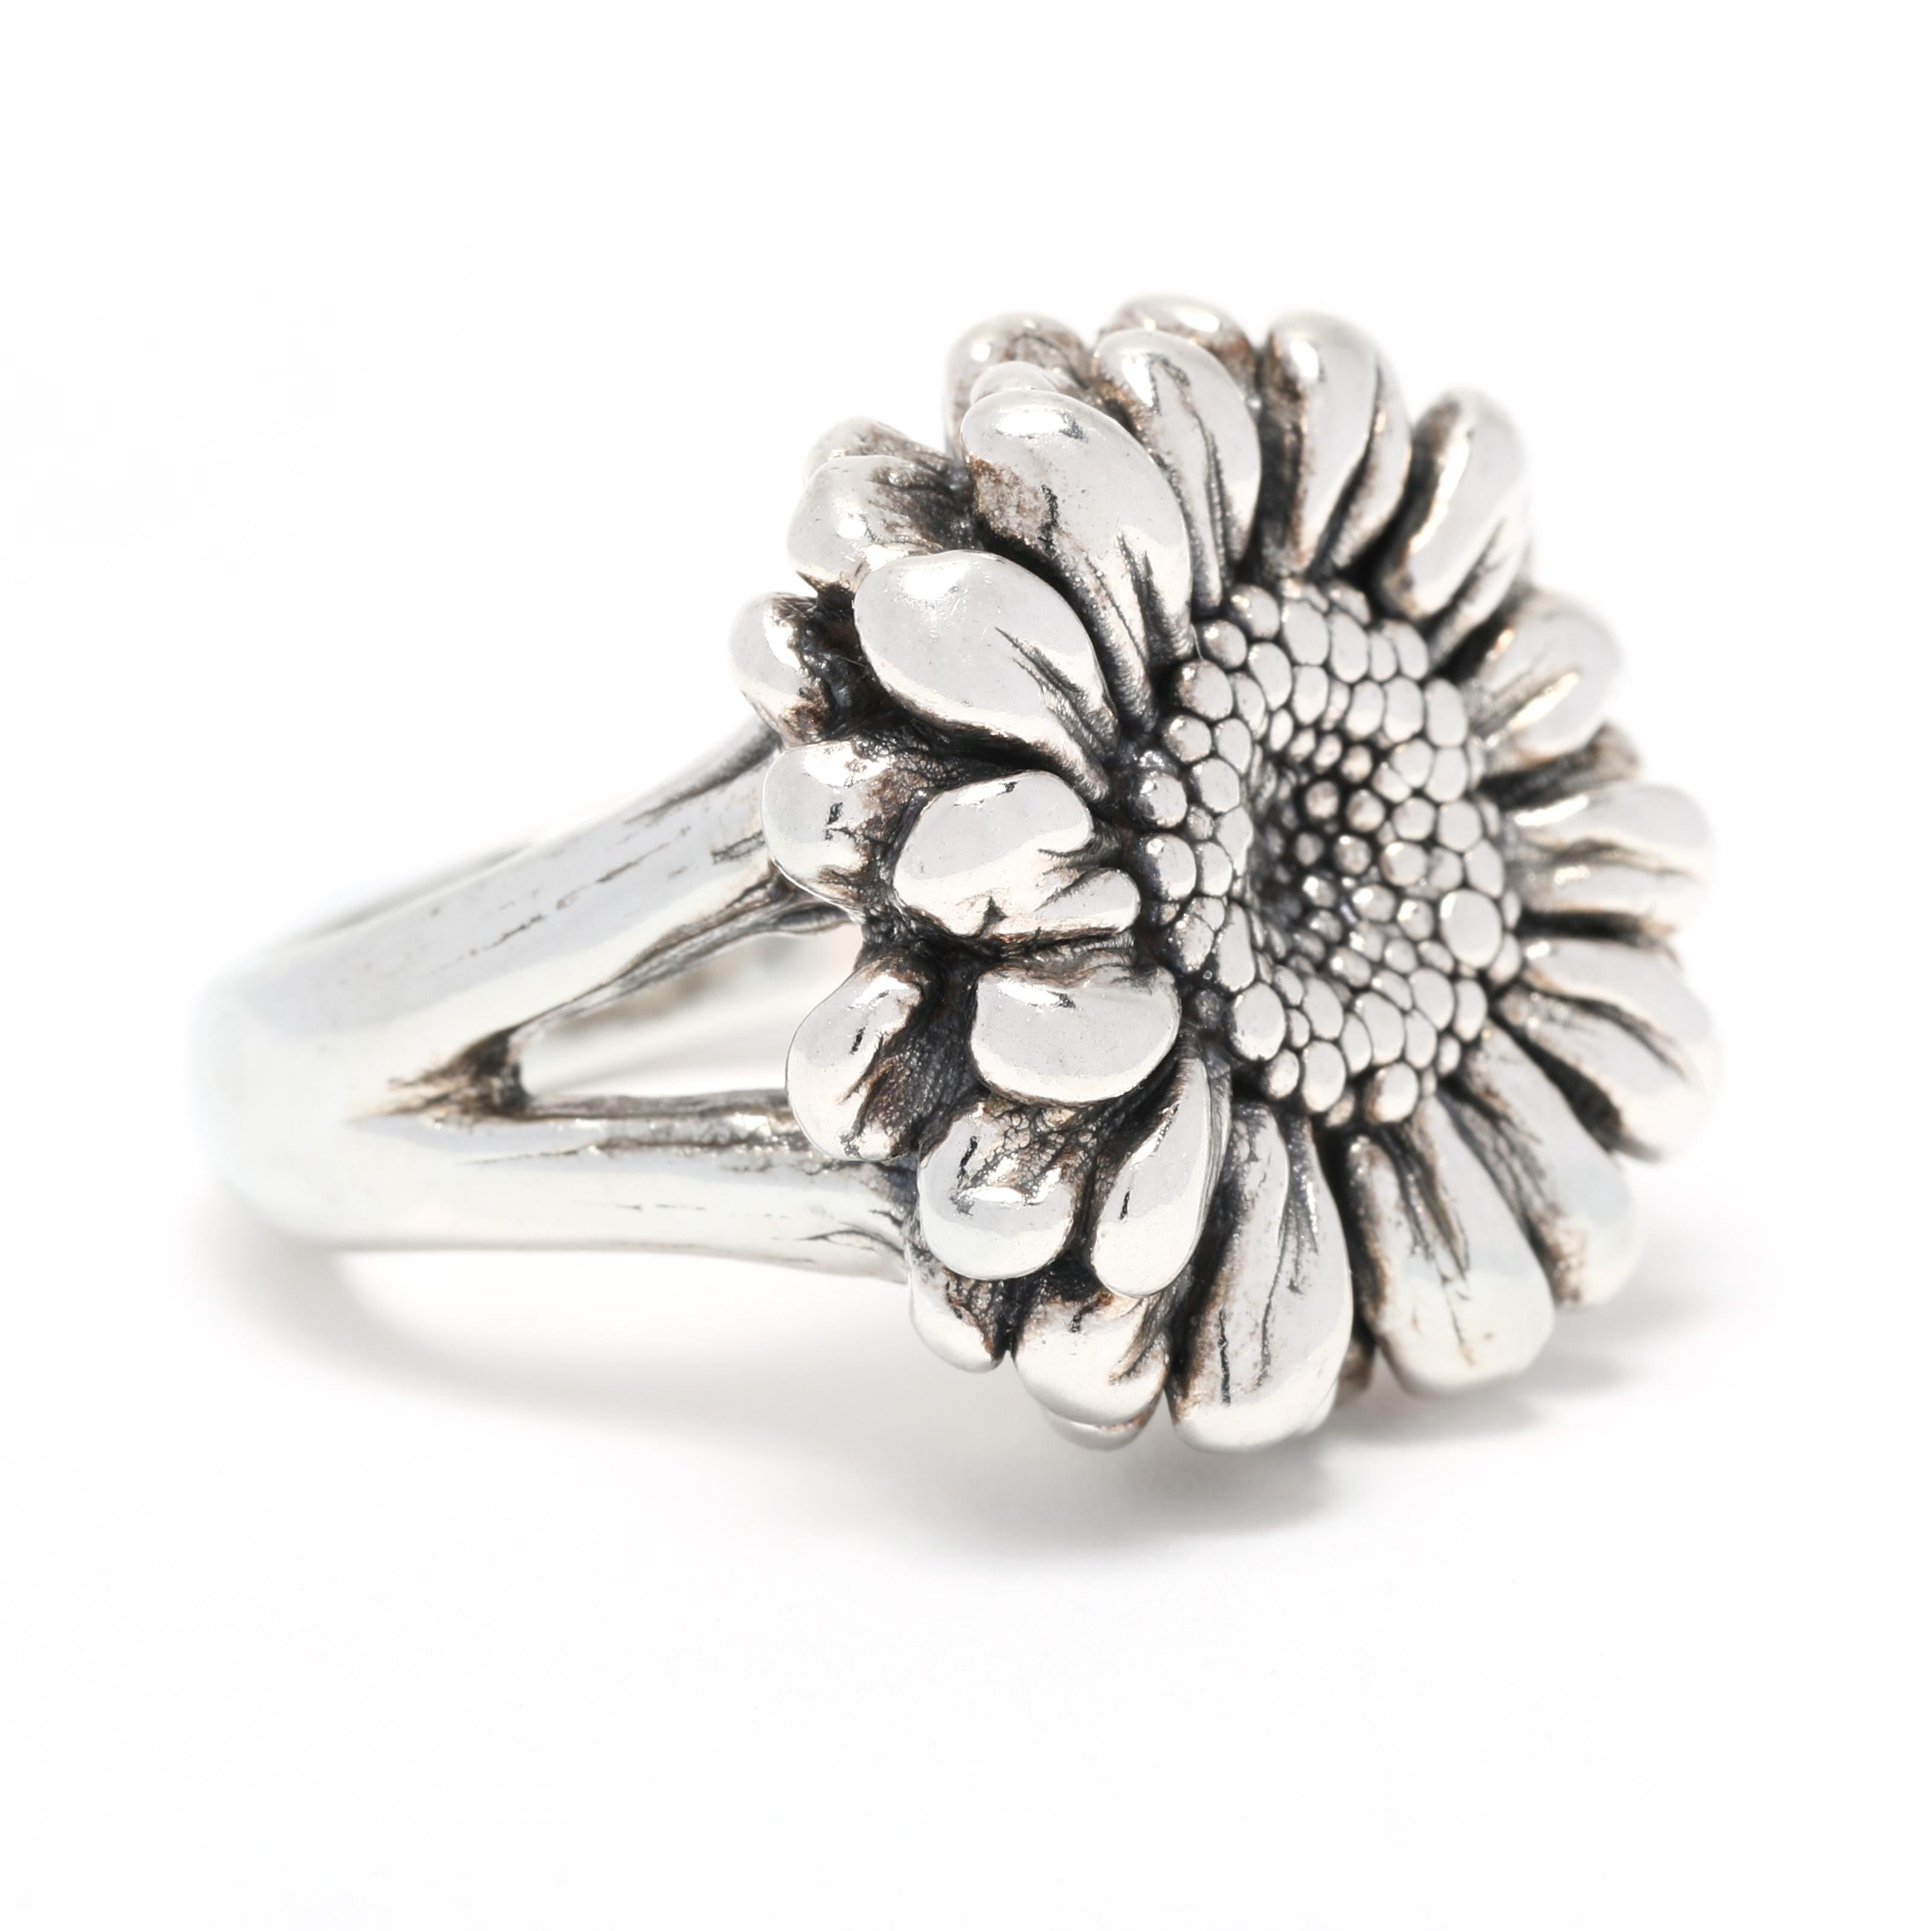 This Large Hollow Sunflower Statement Ring is a beautiful and simple way to add a touch of nature's beauty to any ensemble! Crafted from sterling silver, this ring is designed to look like a sunflower in full bloom. The petals of the flower form a